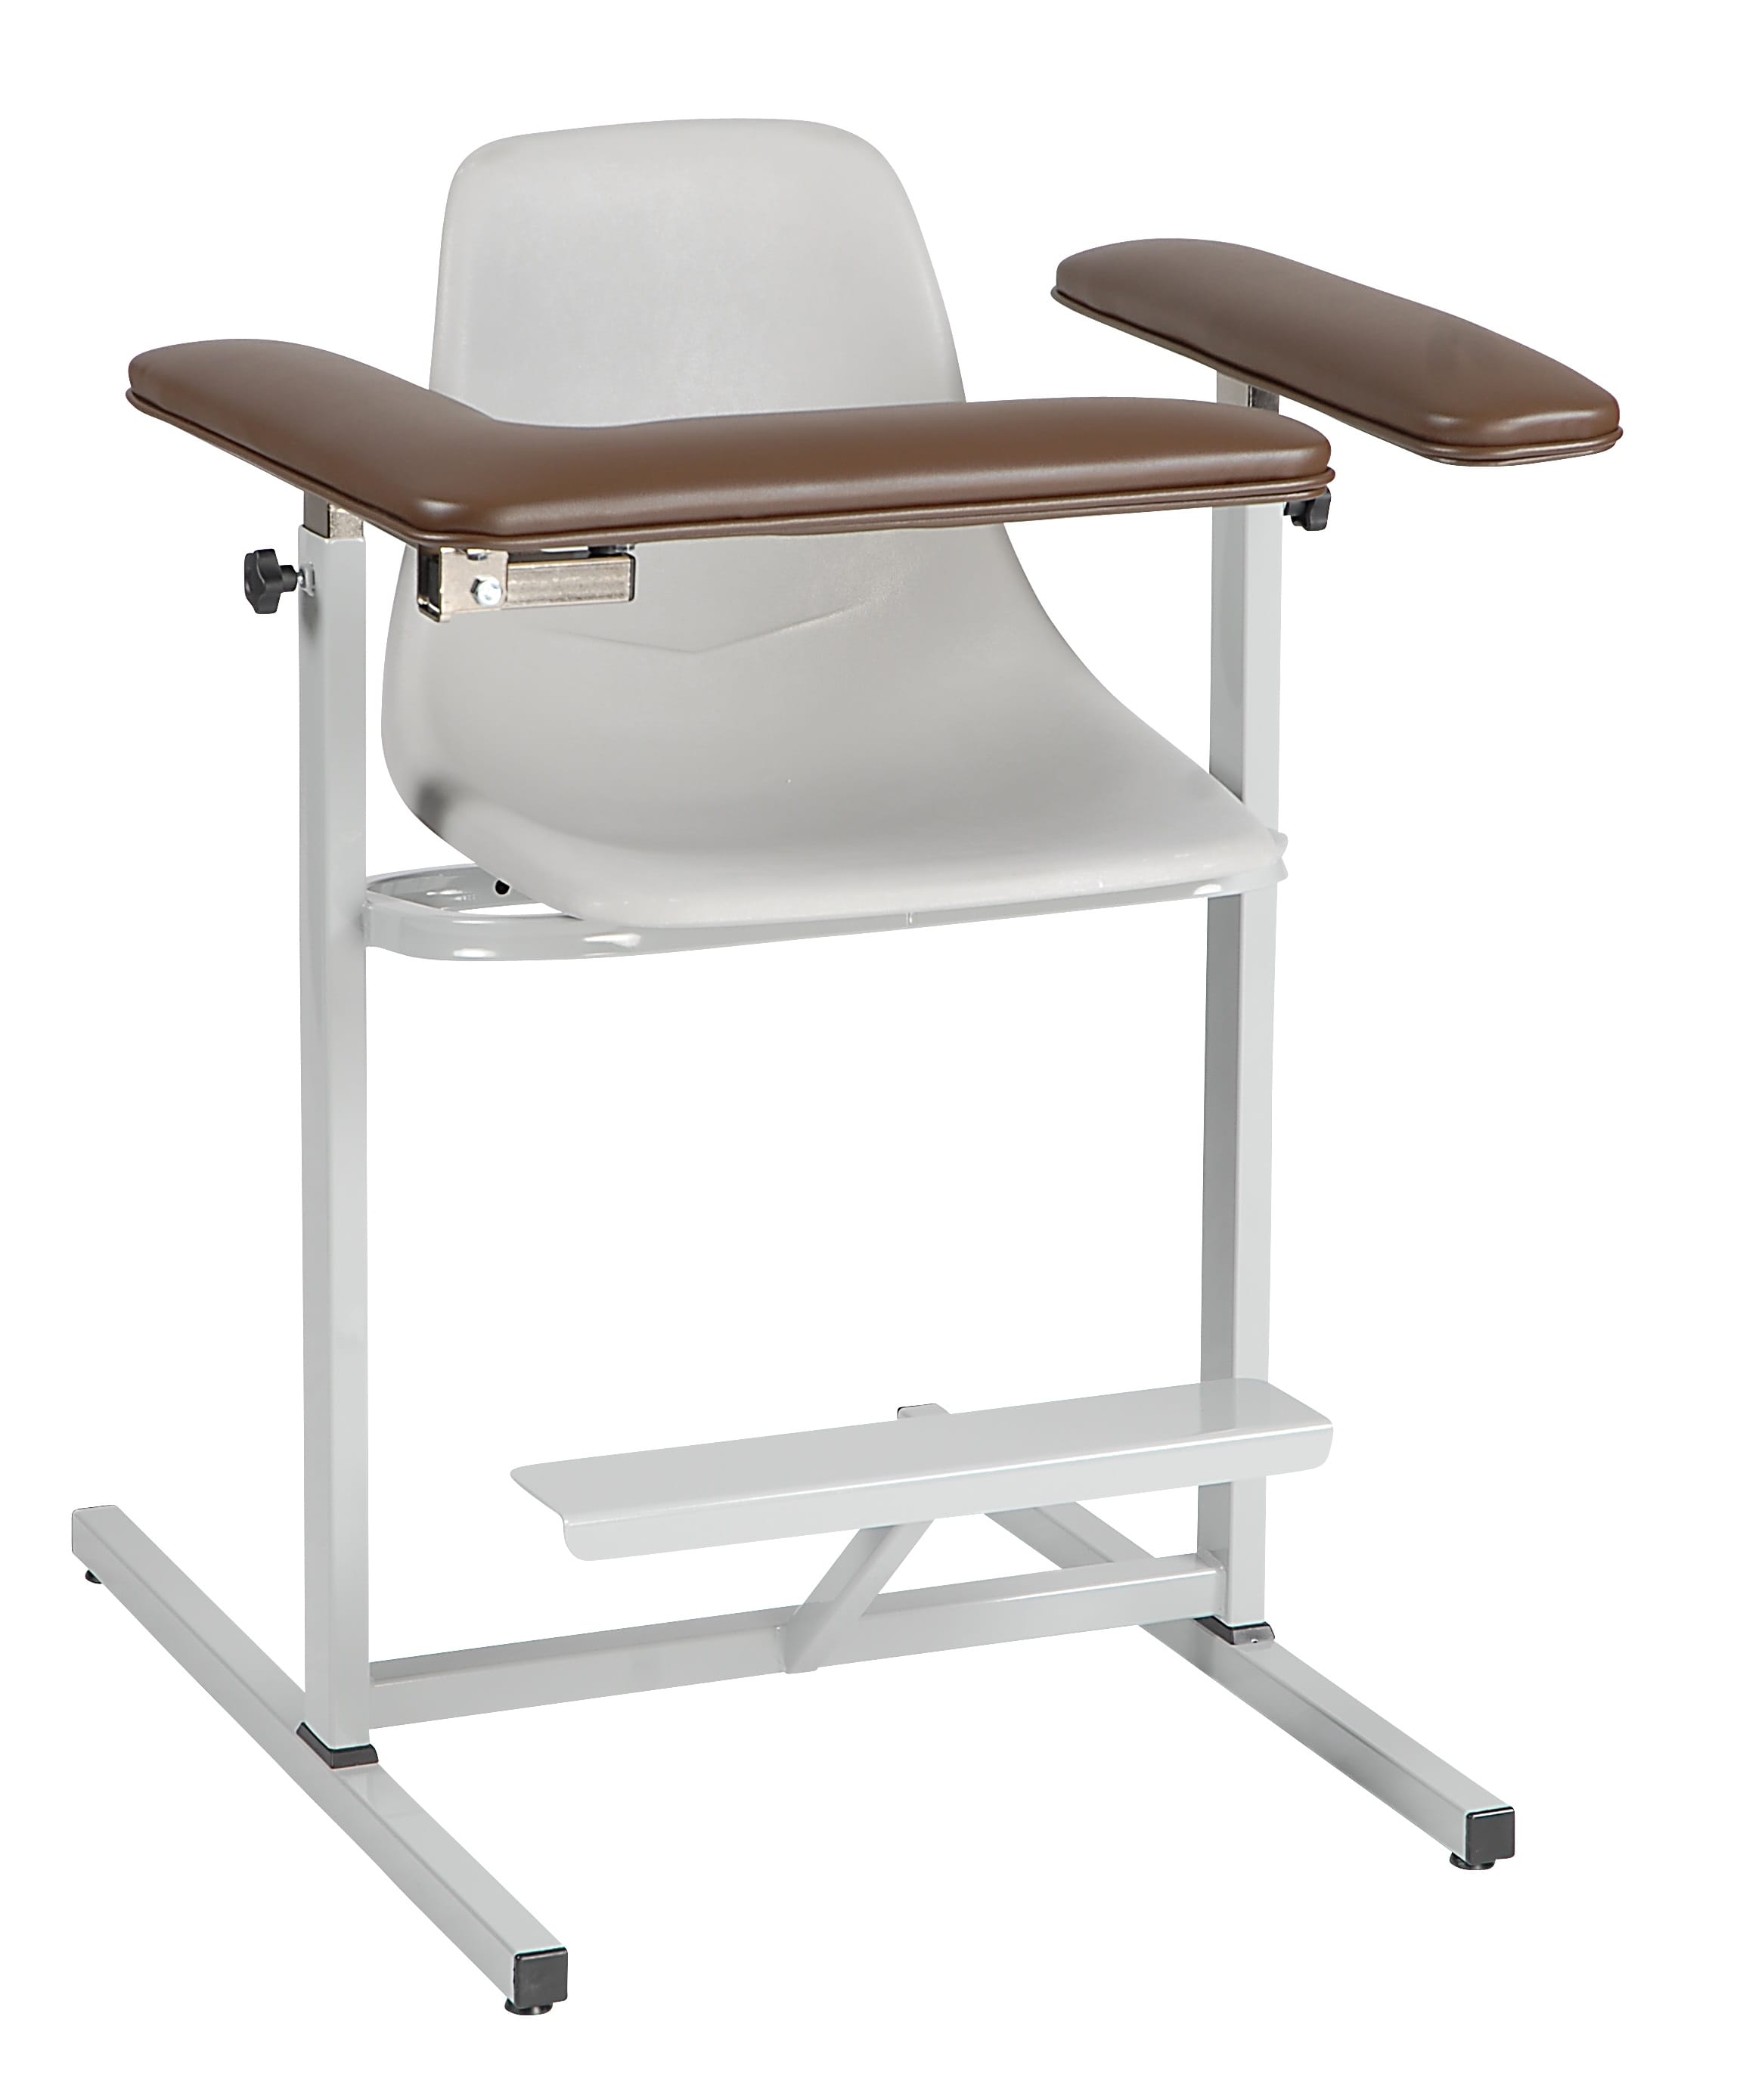 Contoured Seat Narrow Tall Height Space Saving Blood Draw Chair